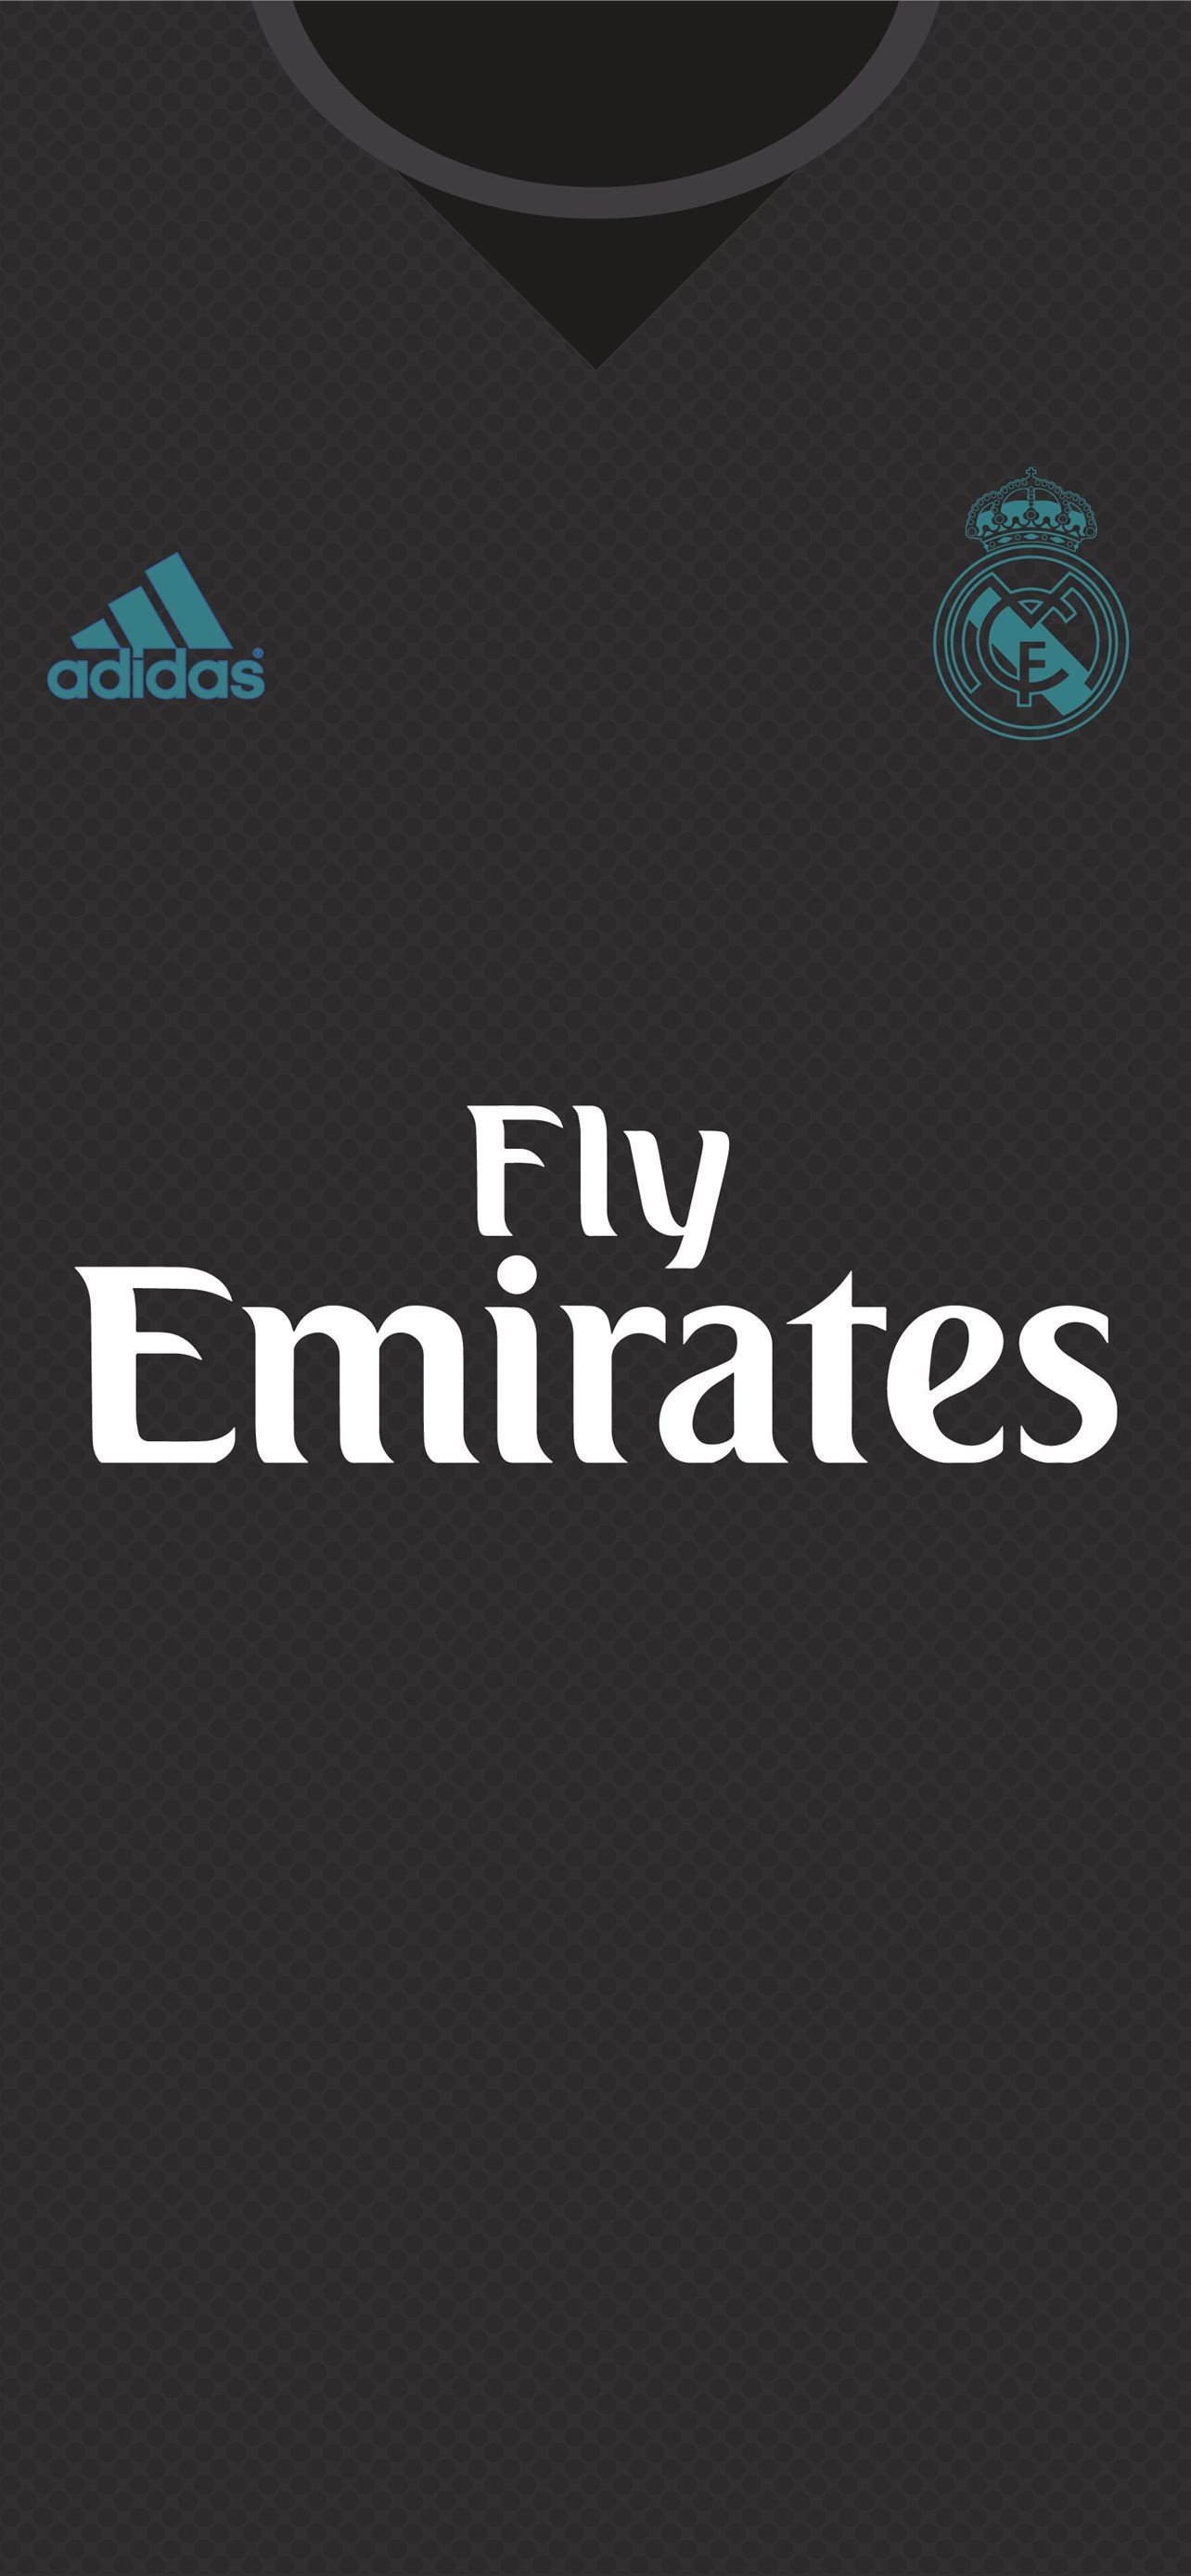 Adidas 18 Iphone Wallpapers Free Download